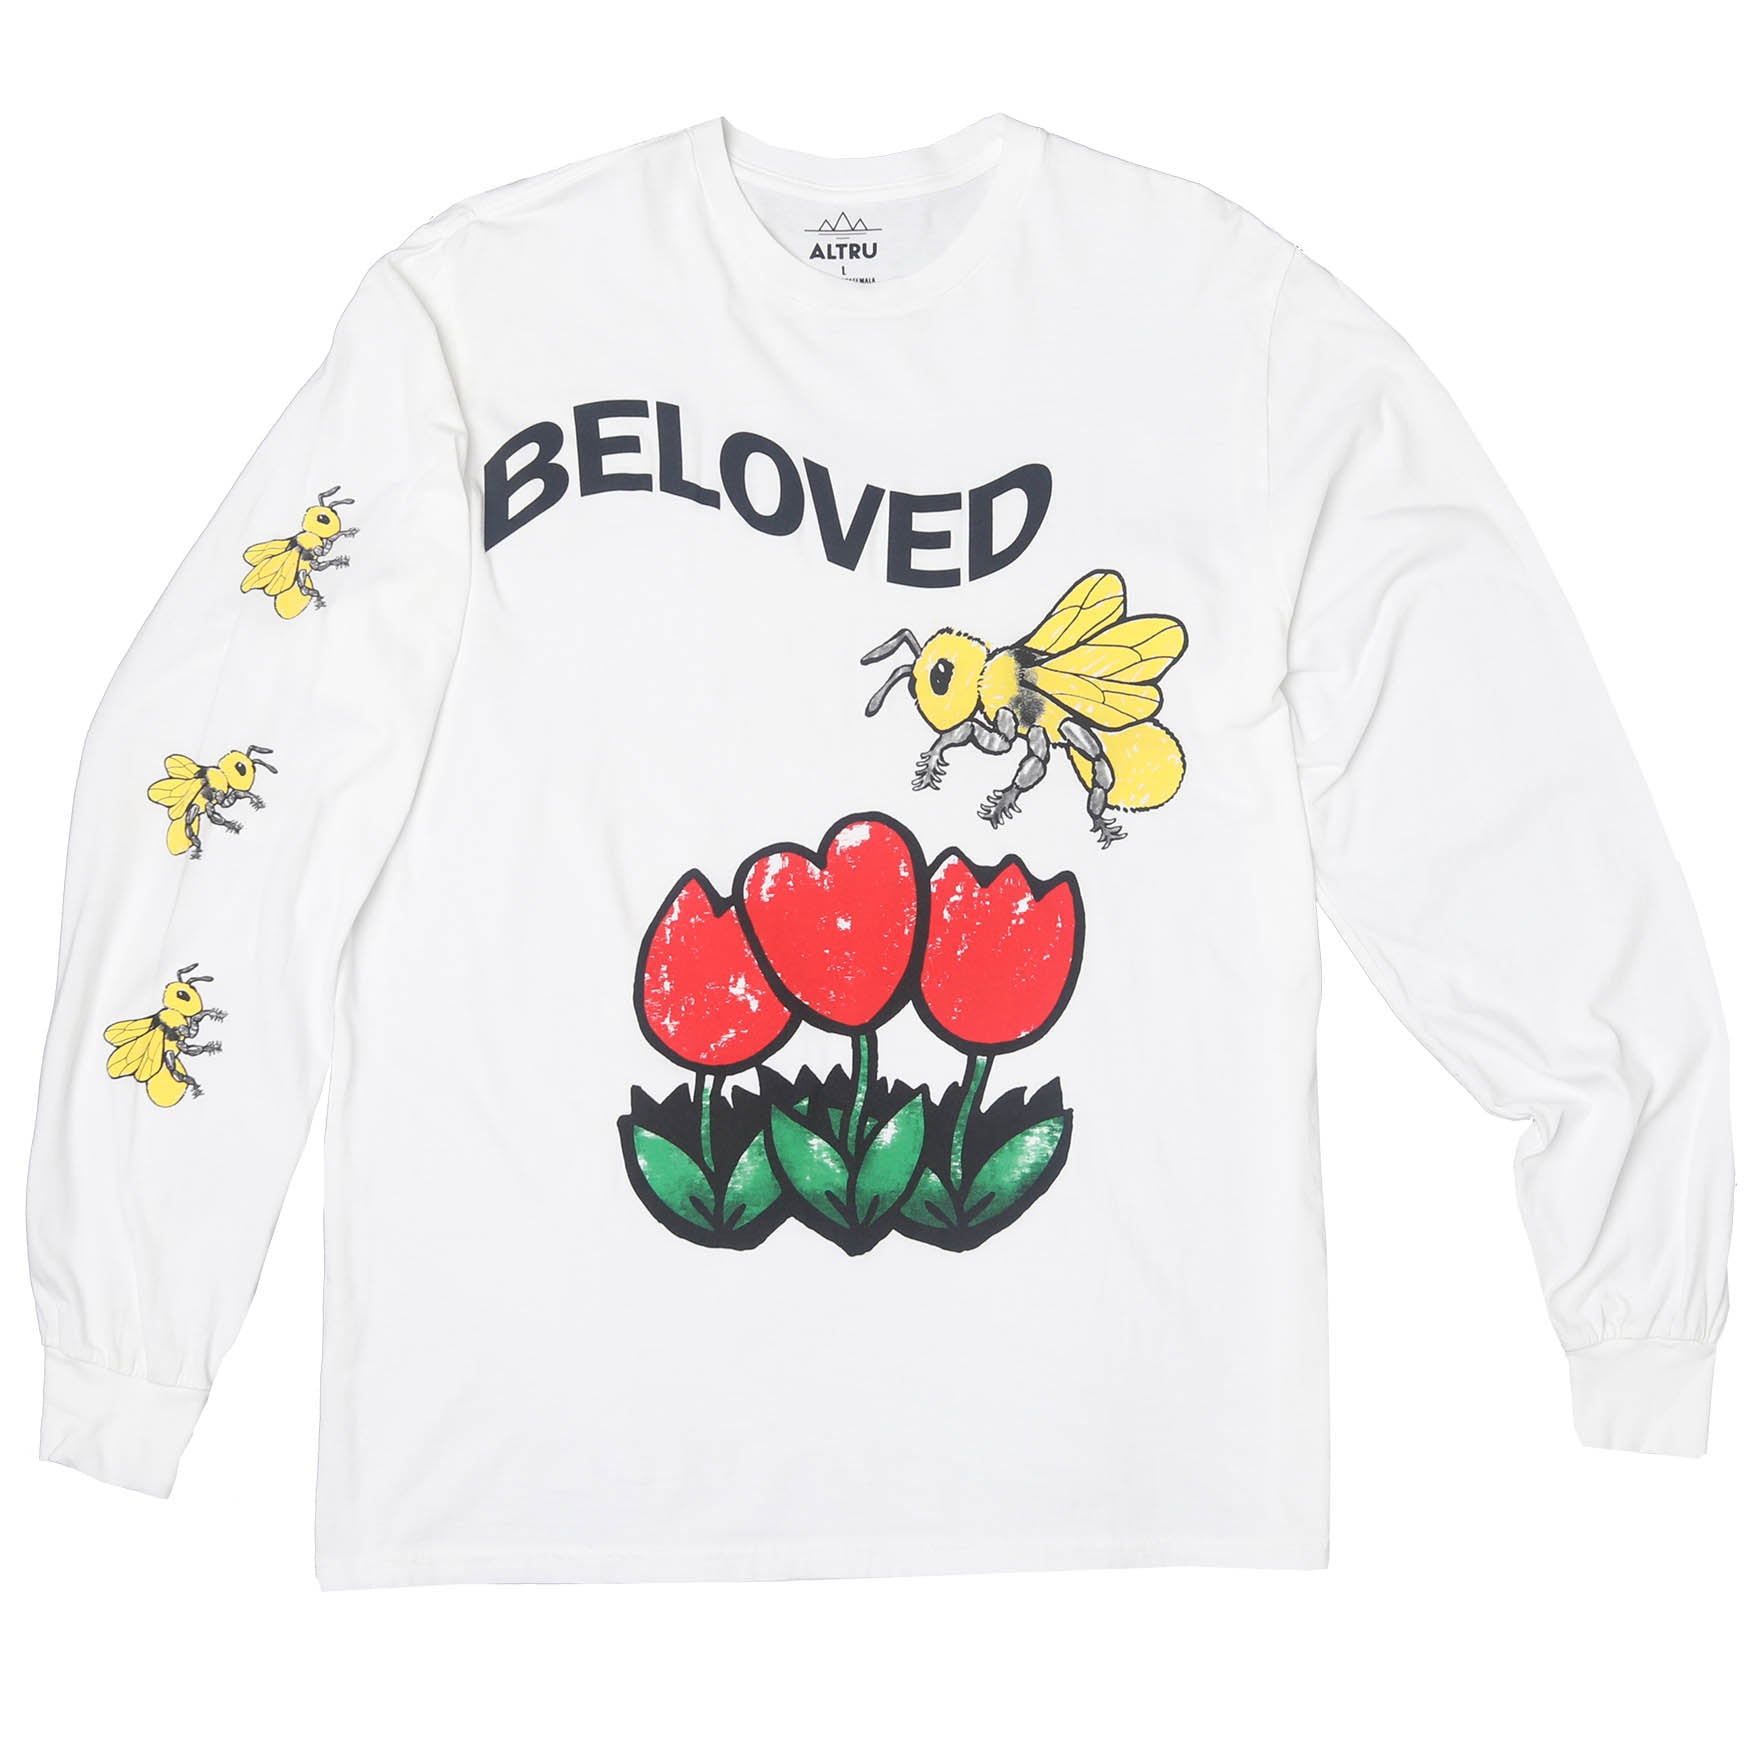 Beloved Tulips Bee L/S T-shirt graphic on front & right sleeve